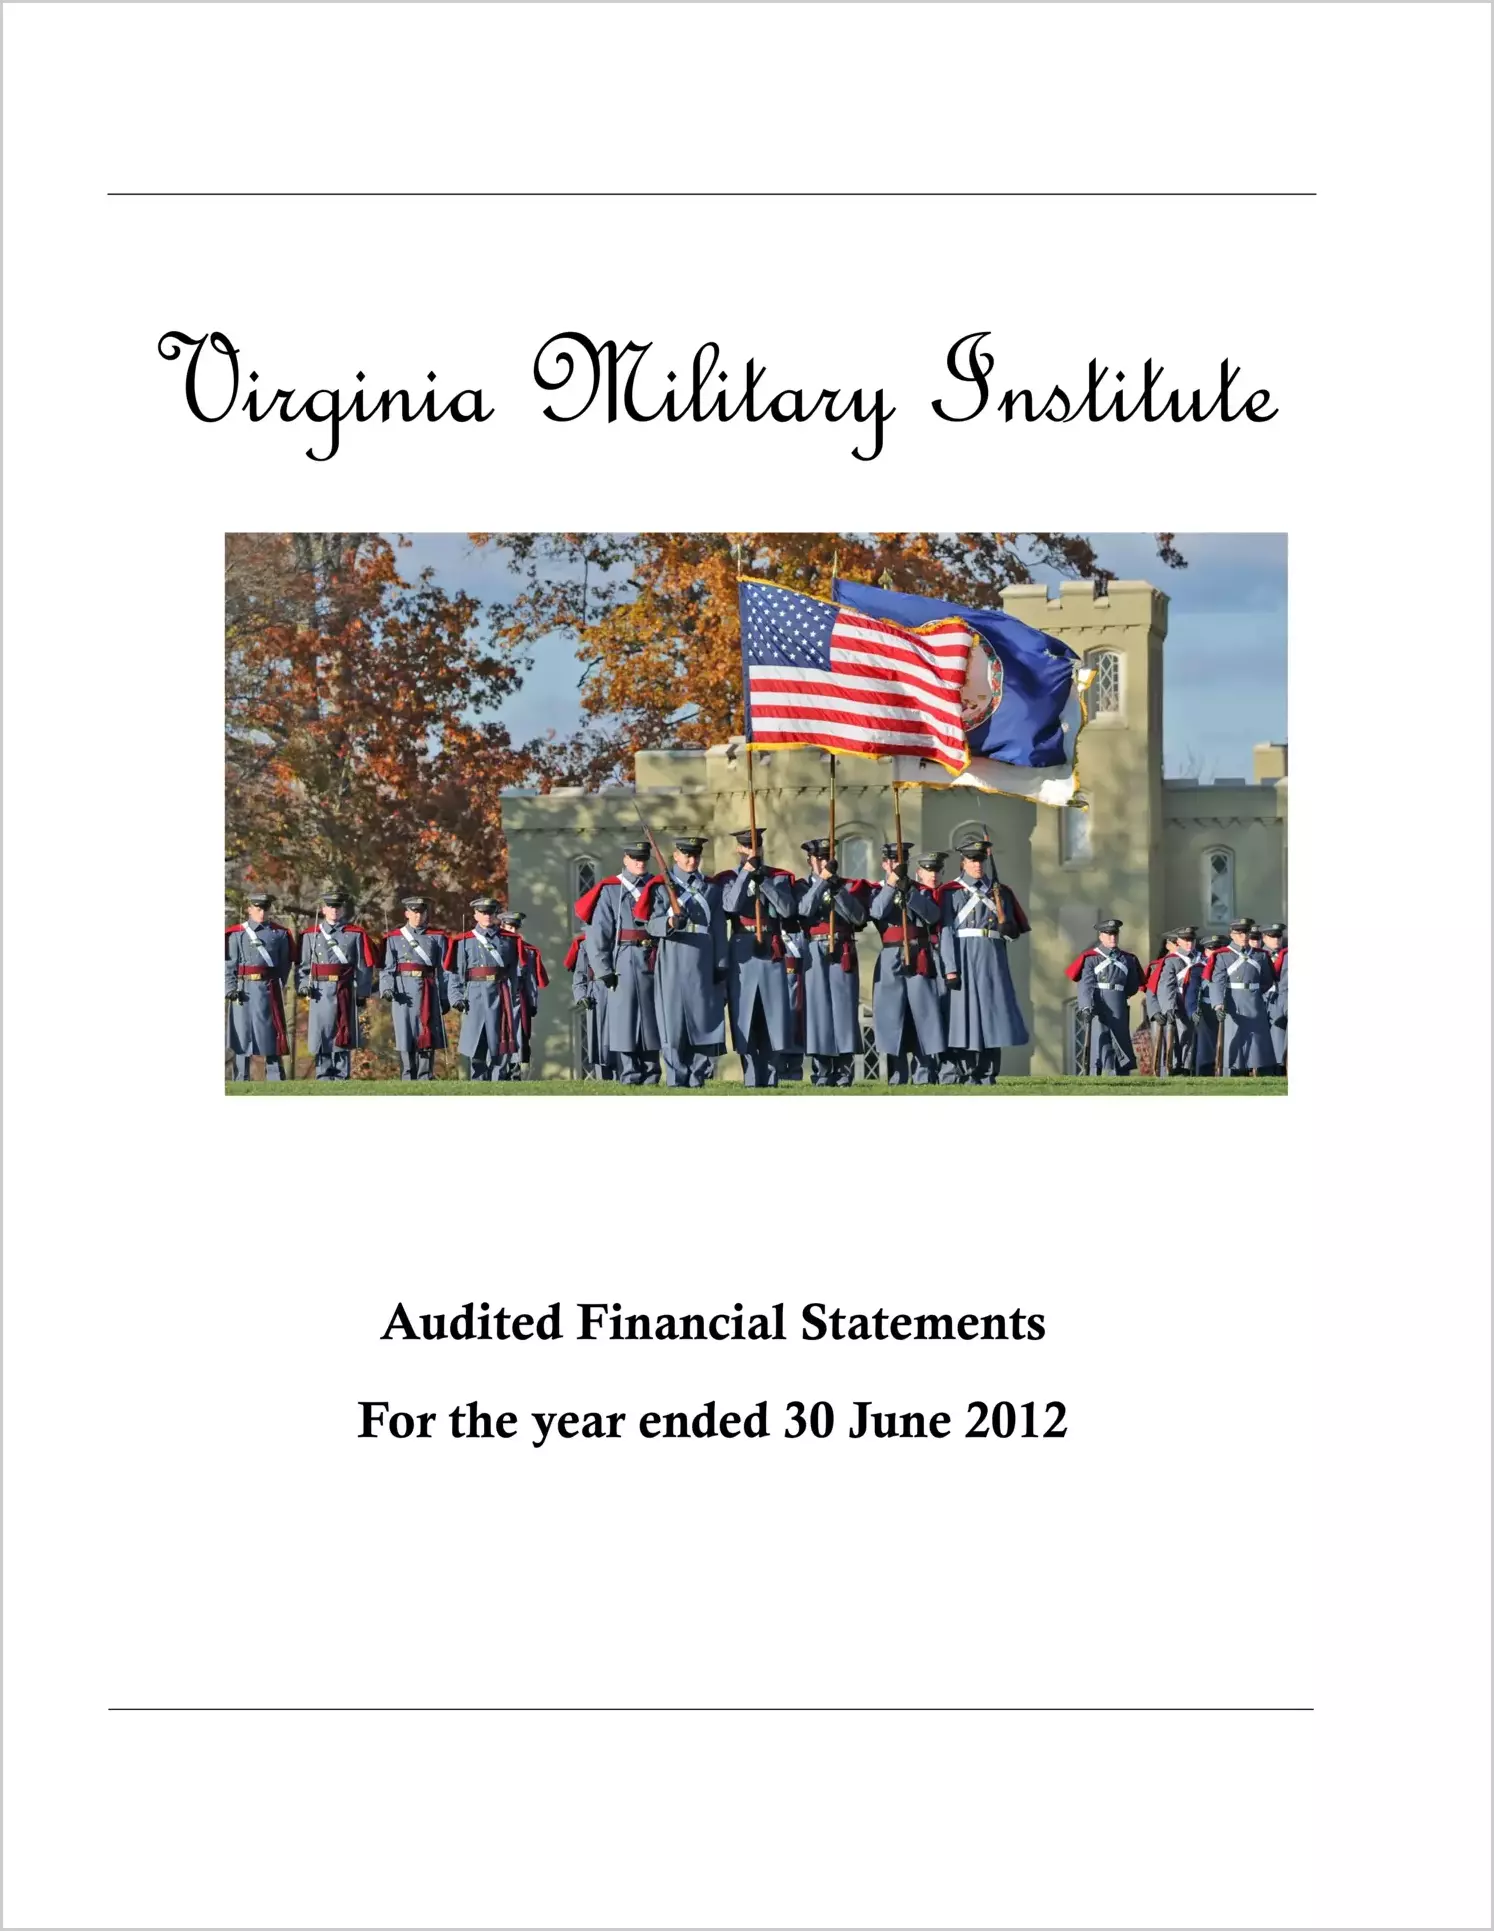 Virginia Military Institute Financial Statements for year ended June 30, 2012